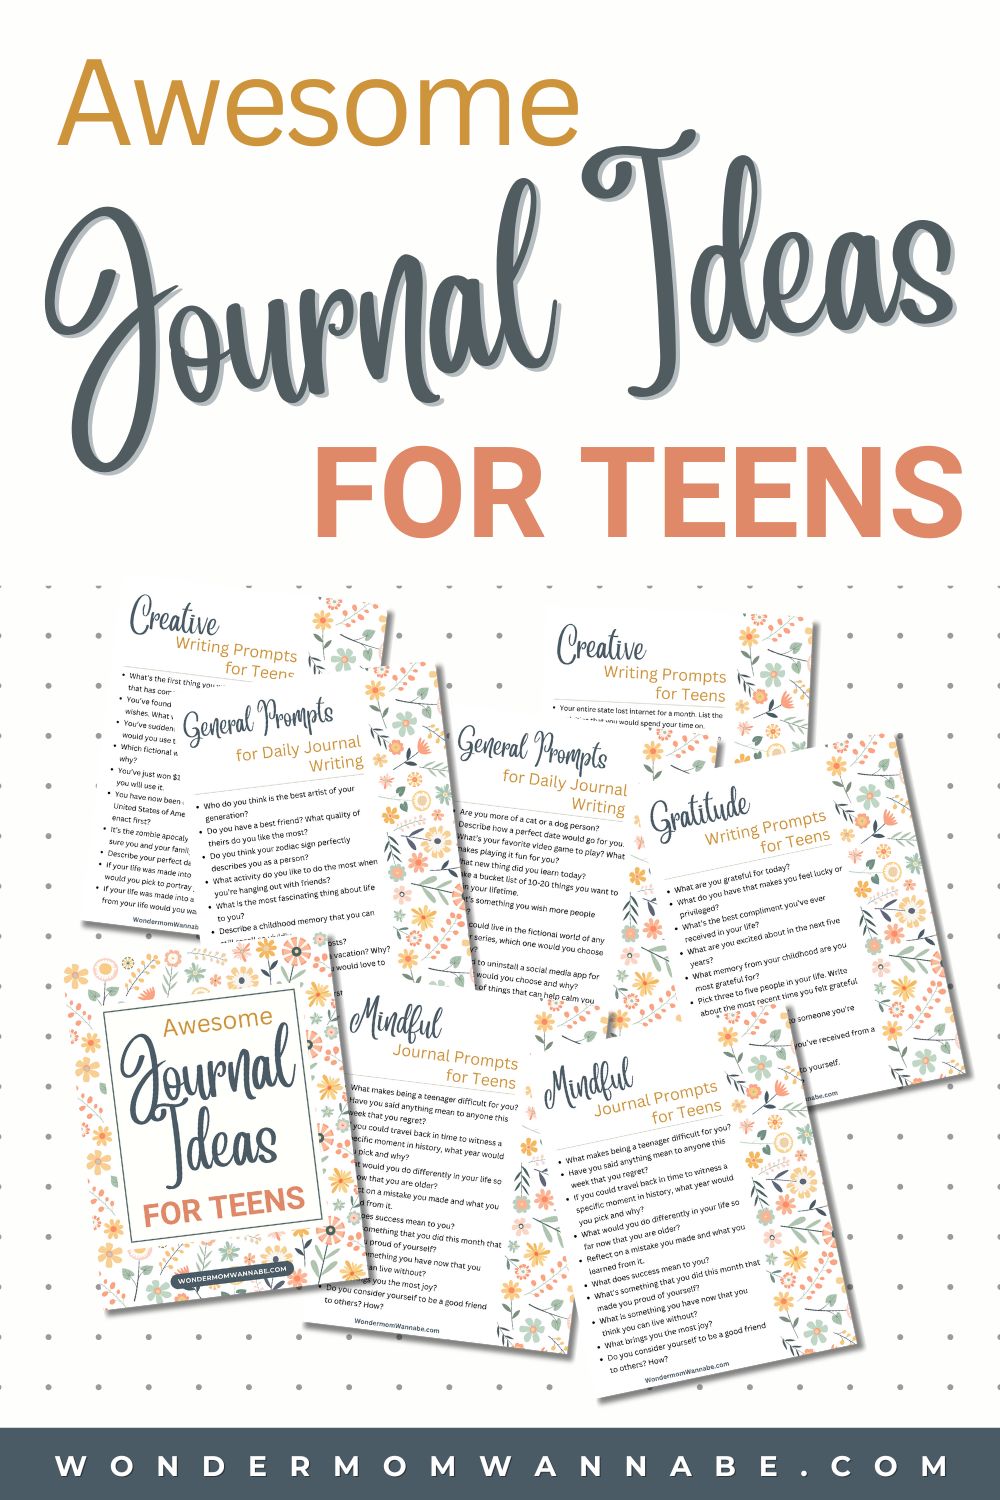 A promotional poster showcasing various journal ideas for teens with colorful sample prompt cards scattered on a background.